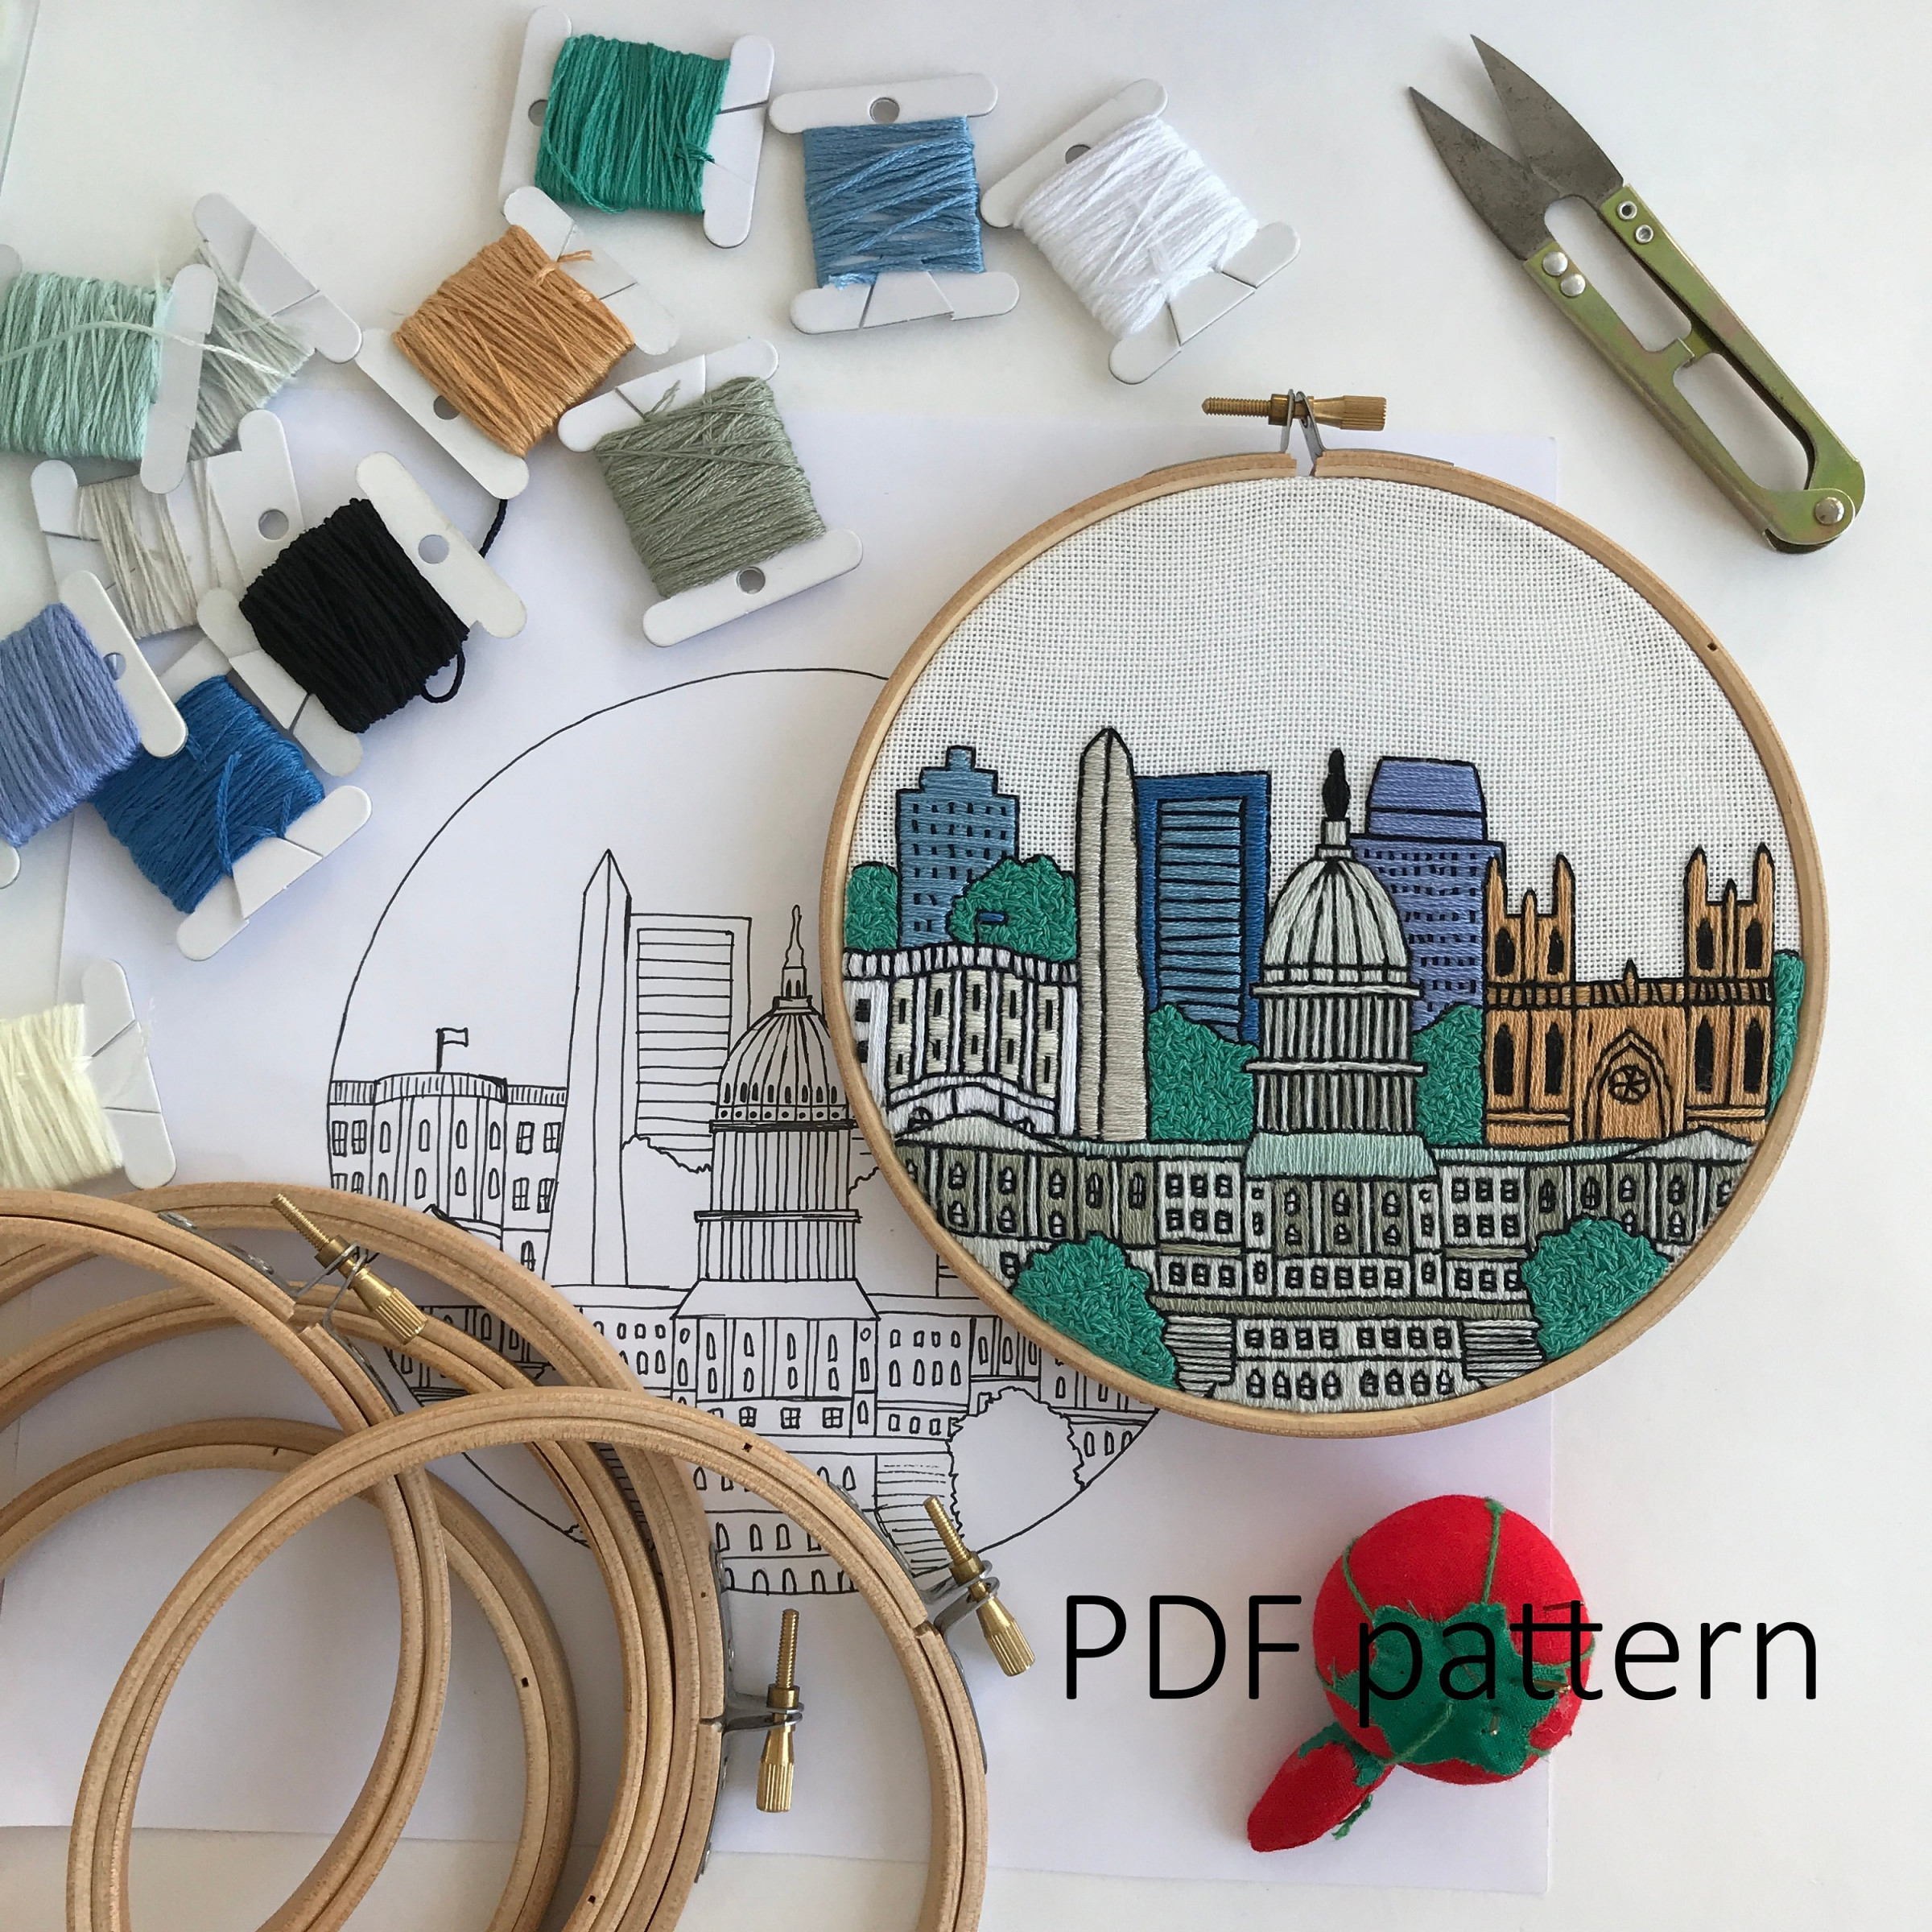 Embroidery Patterns Pdf Hand Embroidery Patterns For Beginners Awesome Washington Dc Hand